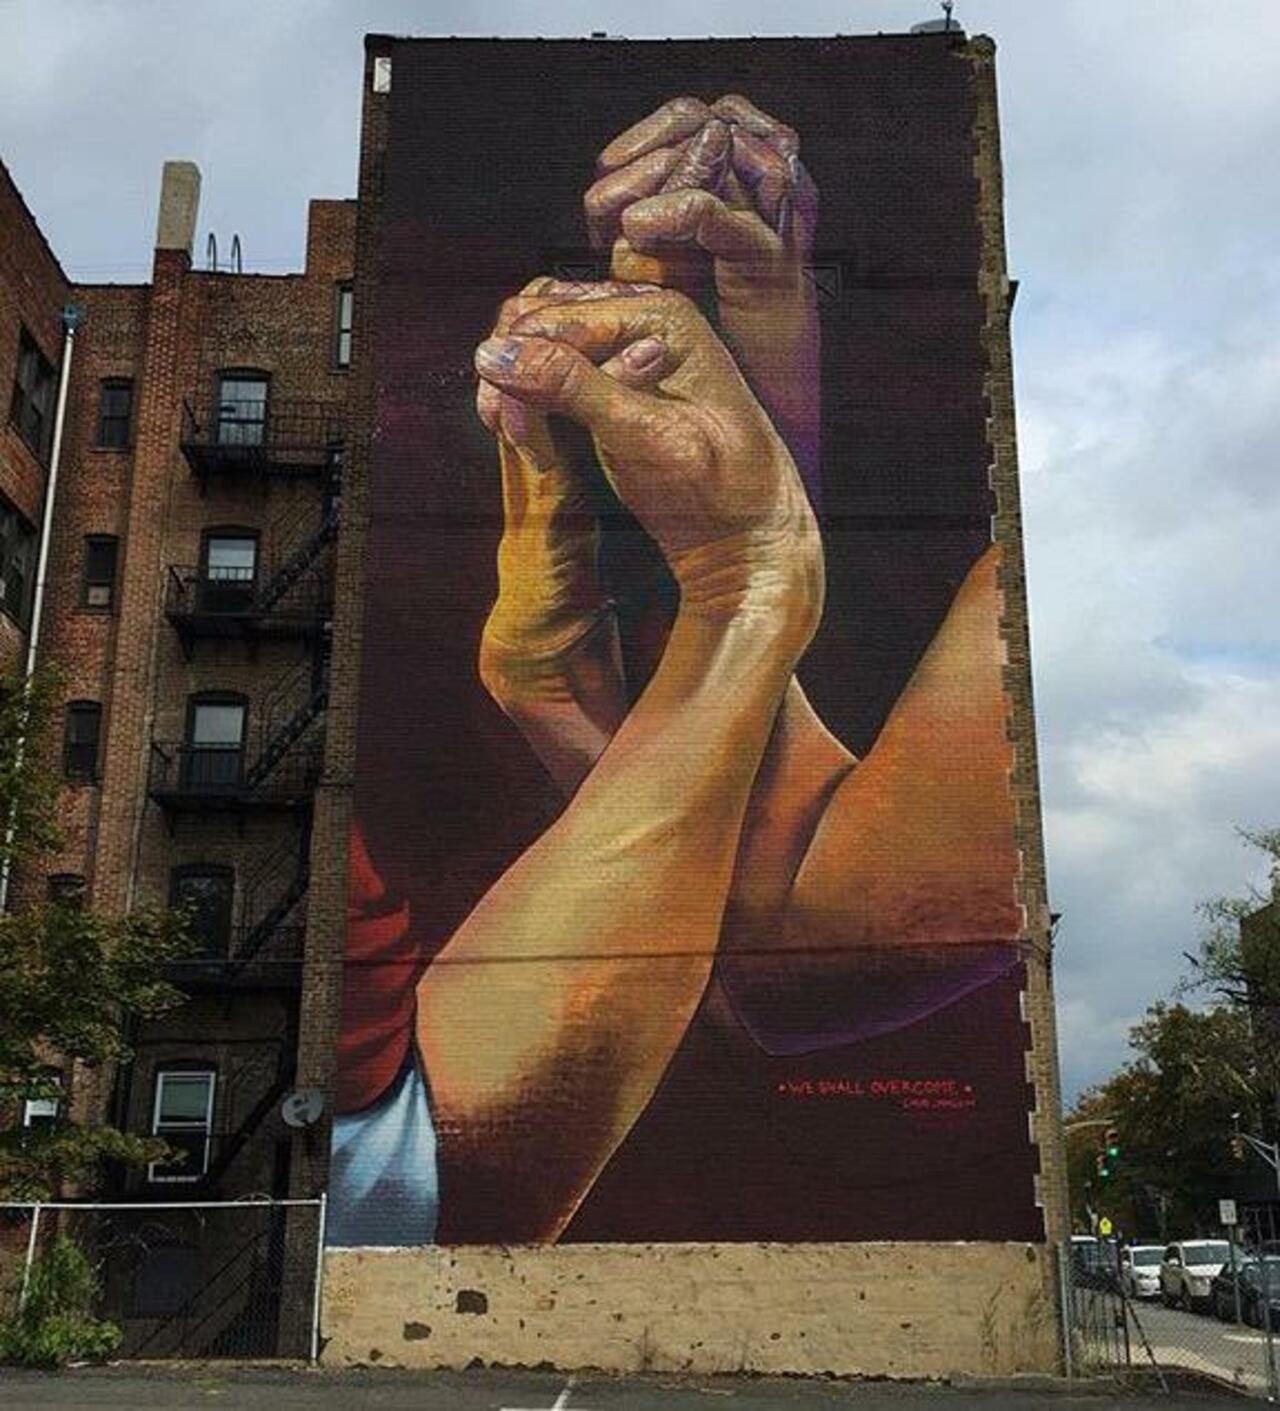 New Street Art by CaseMaclaim in Jersey City for the TheBKcollective 

#art #graffiti #mural #streetart http://t.co/lT89UIwEXT